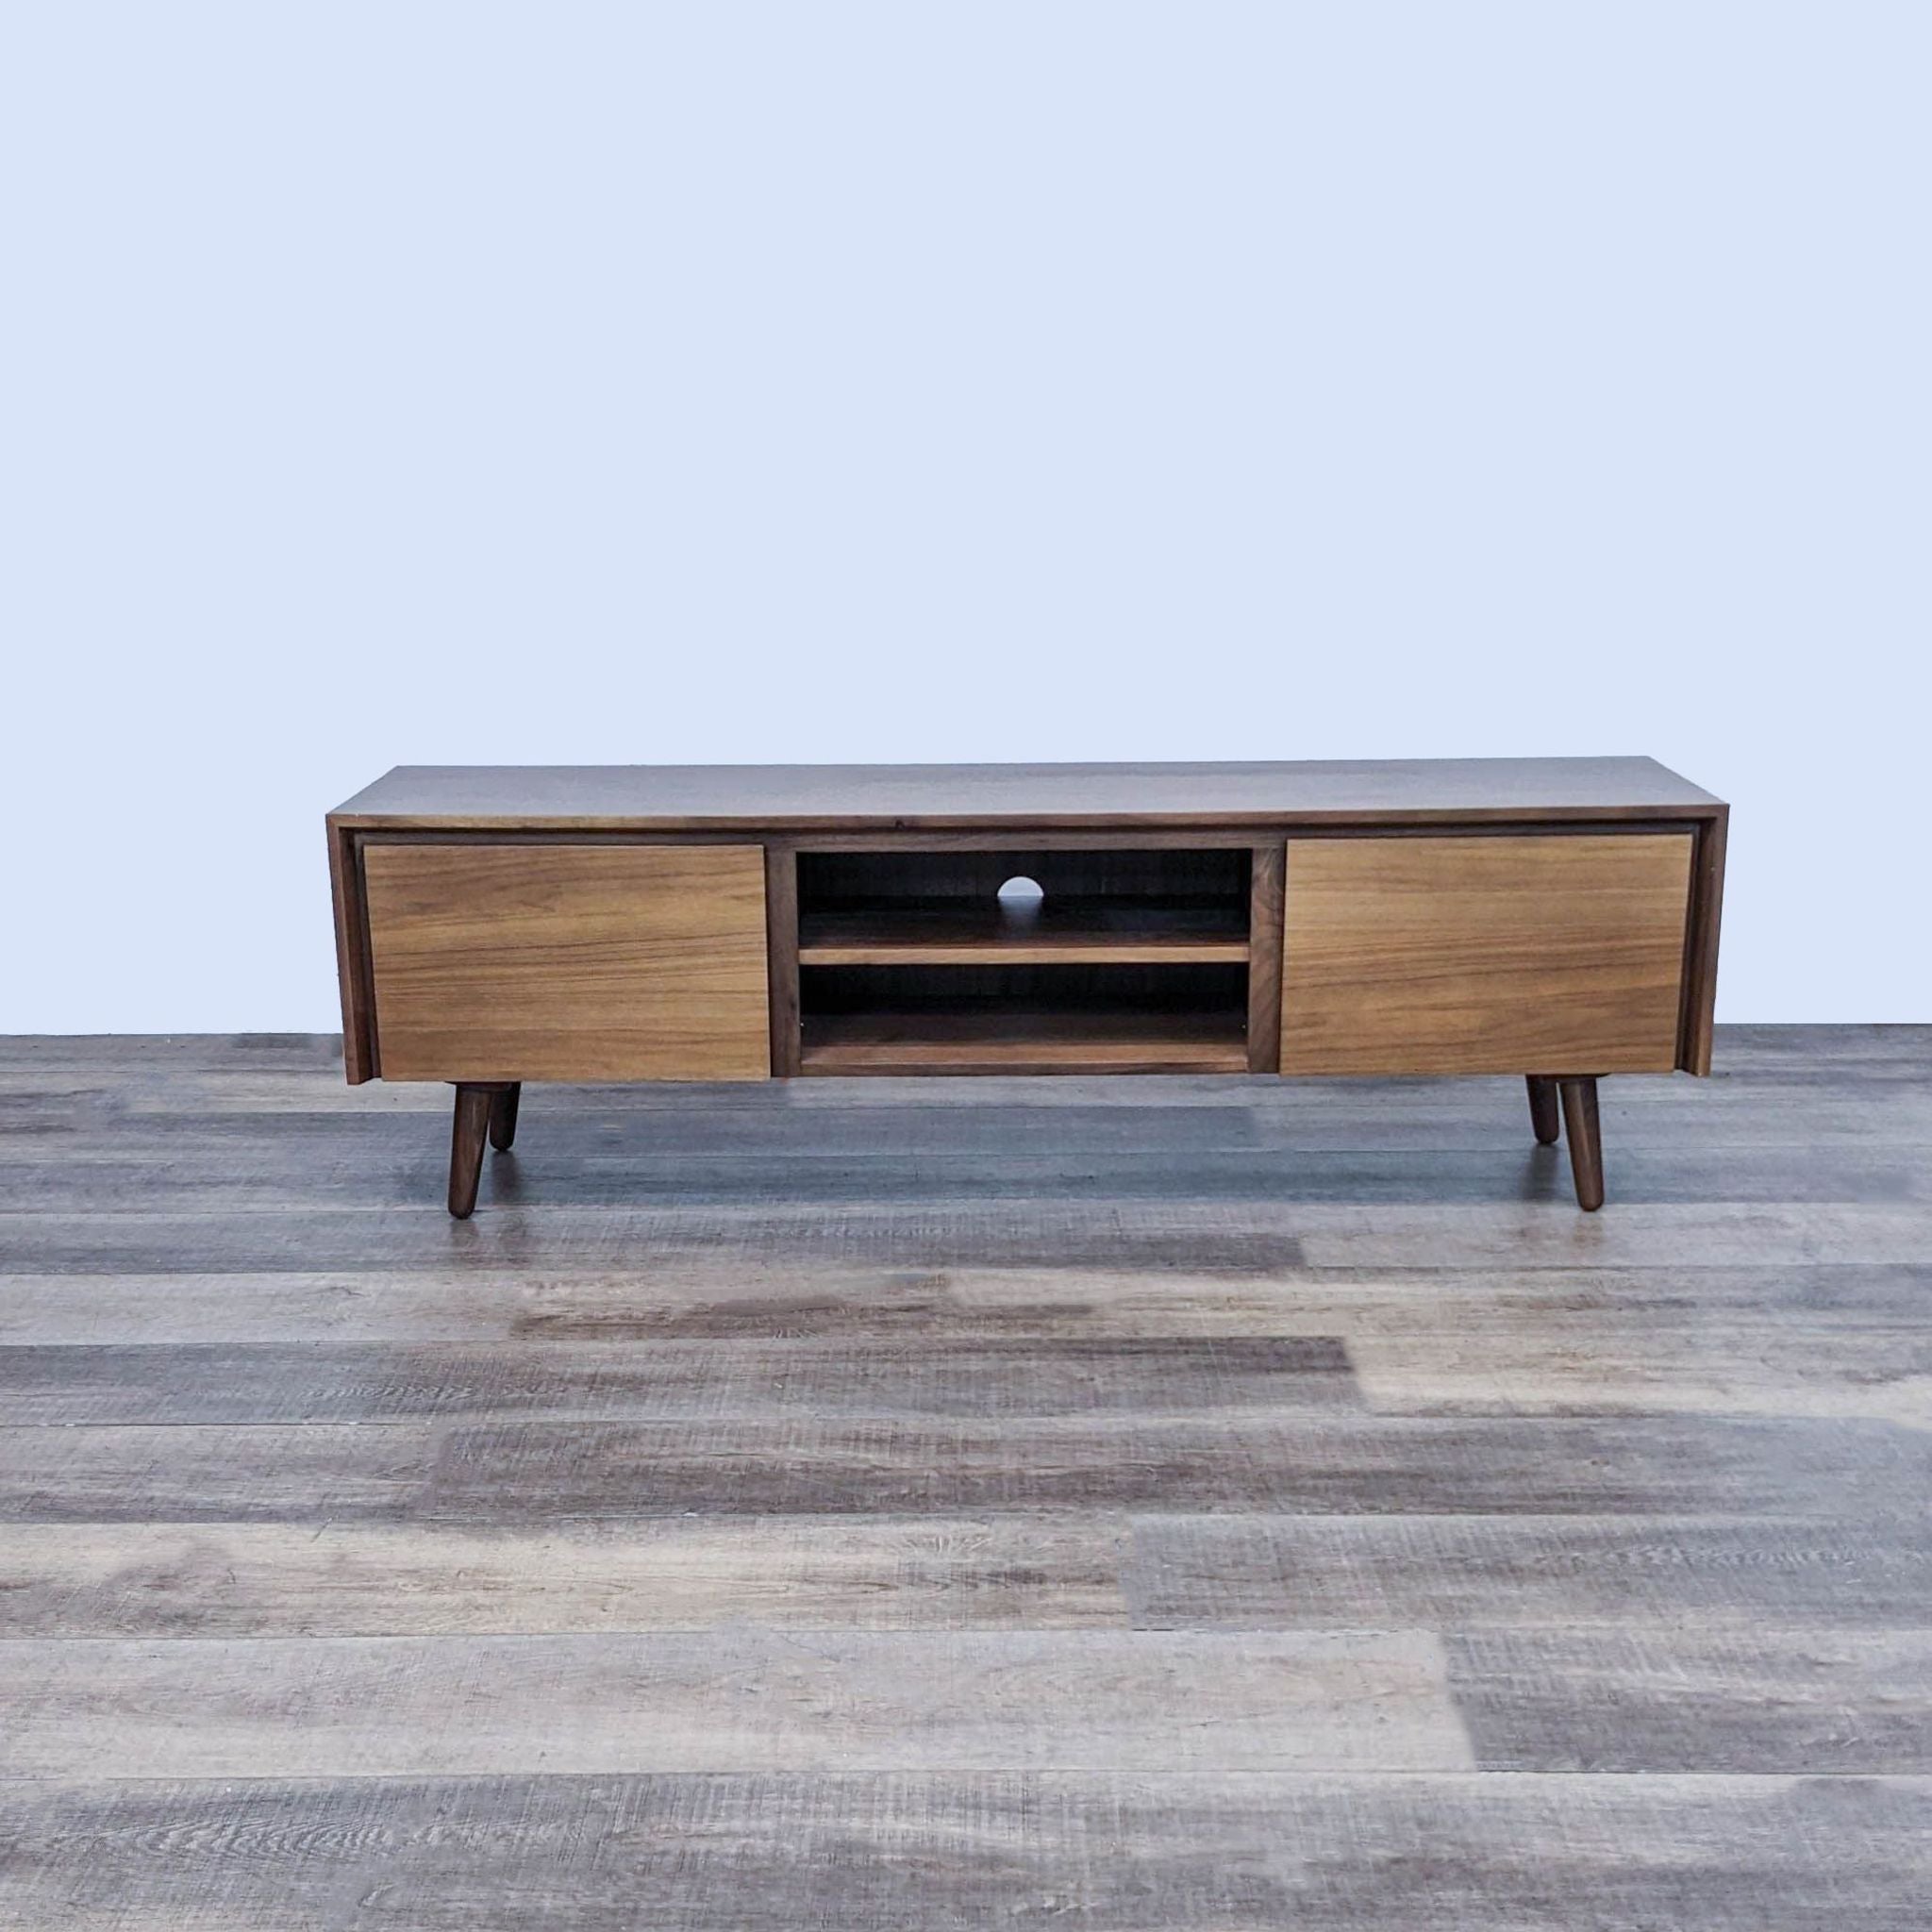 Alt text 1: Article brand Mid-Century Modern entertainment center on a wooden floor, featuring a beveled top, open shelf, and tapered legs.